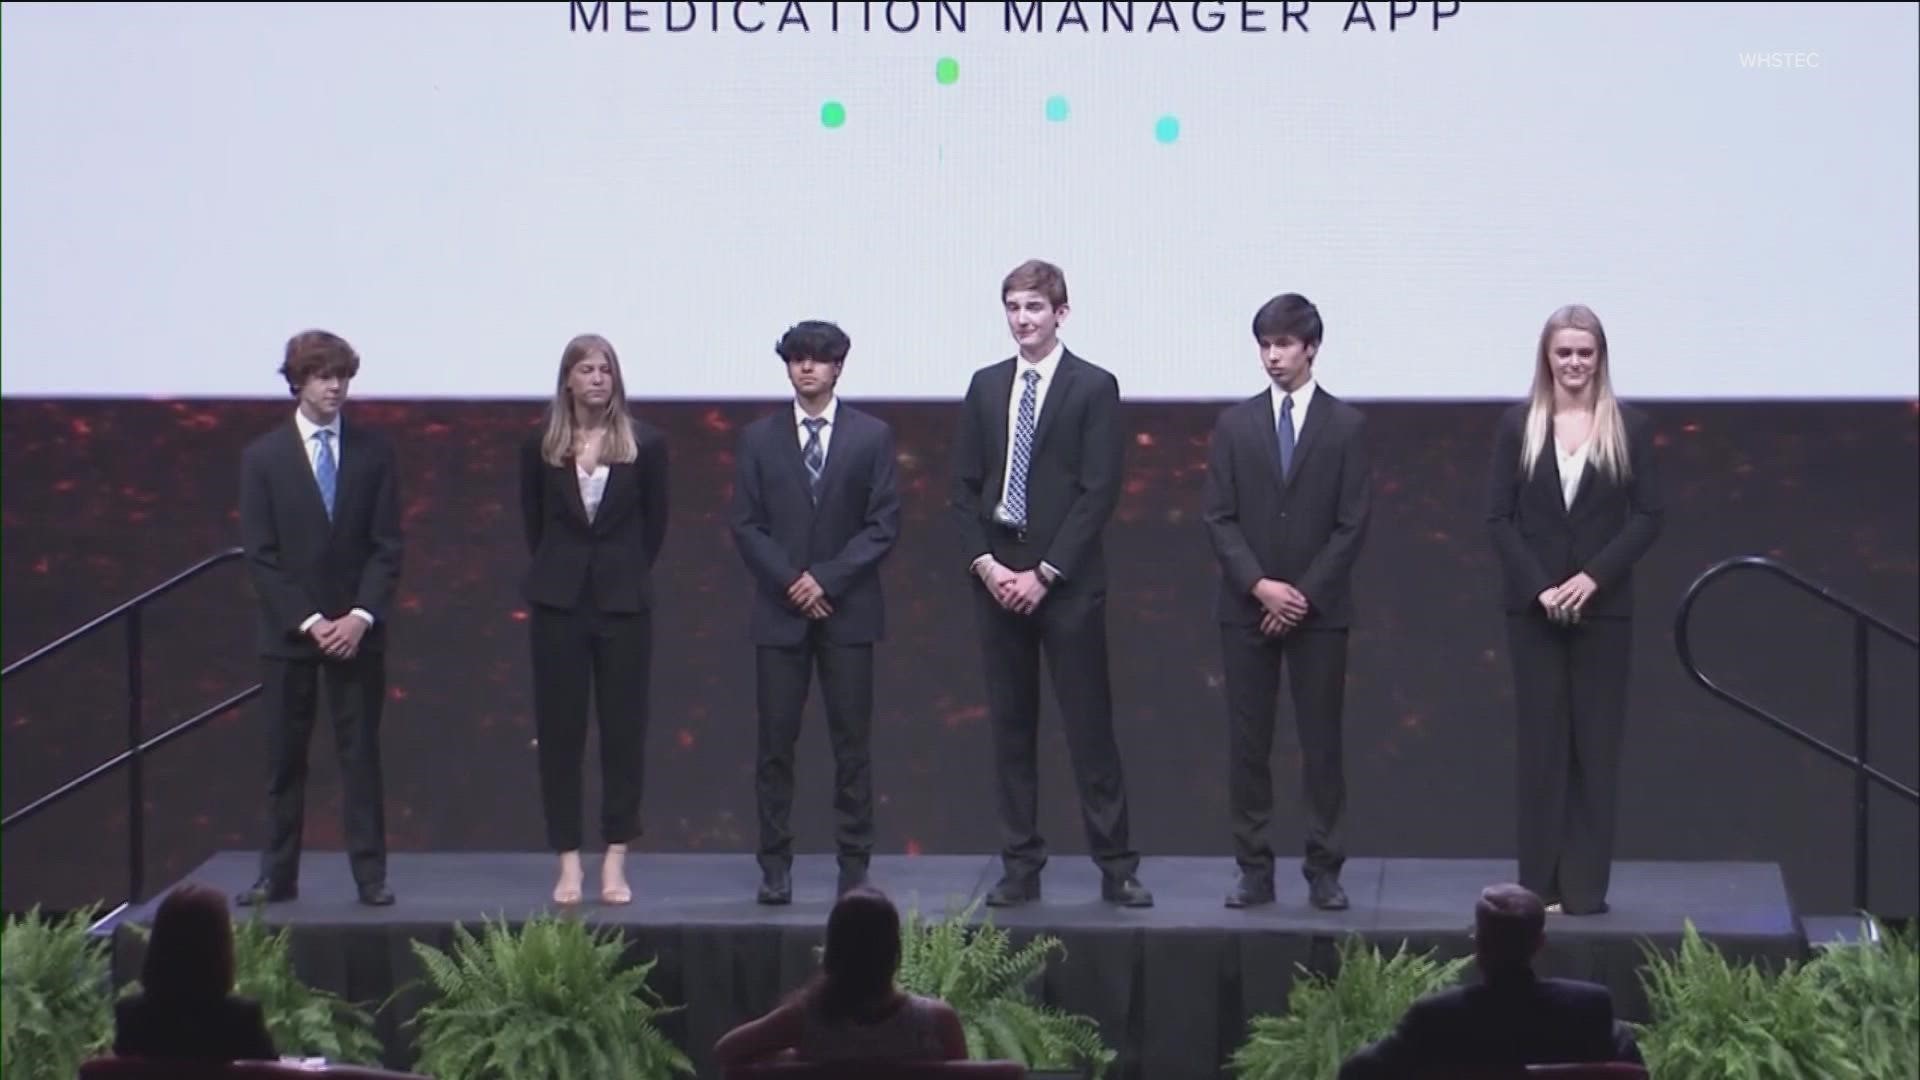 A team of five students at Westlake High School came up with a medical app that won two grants.